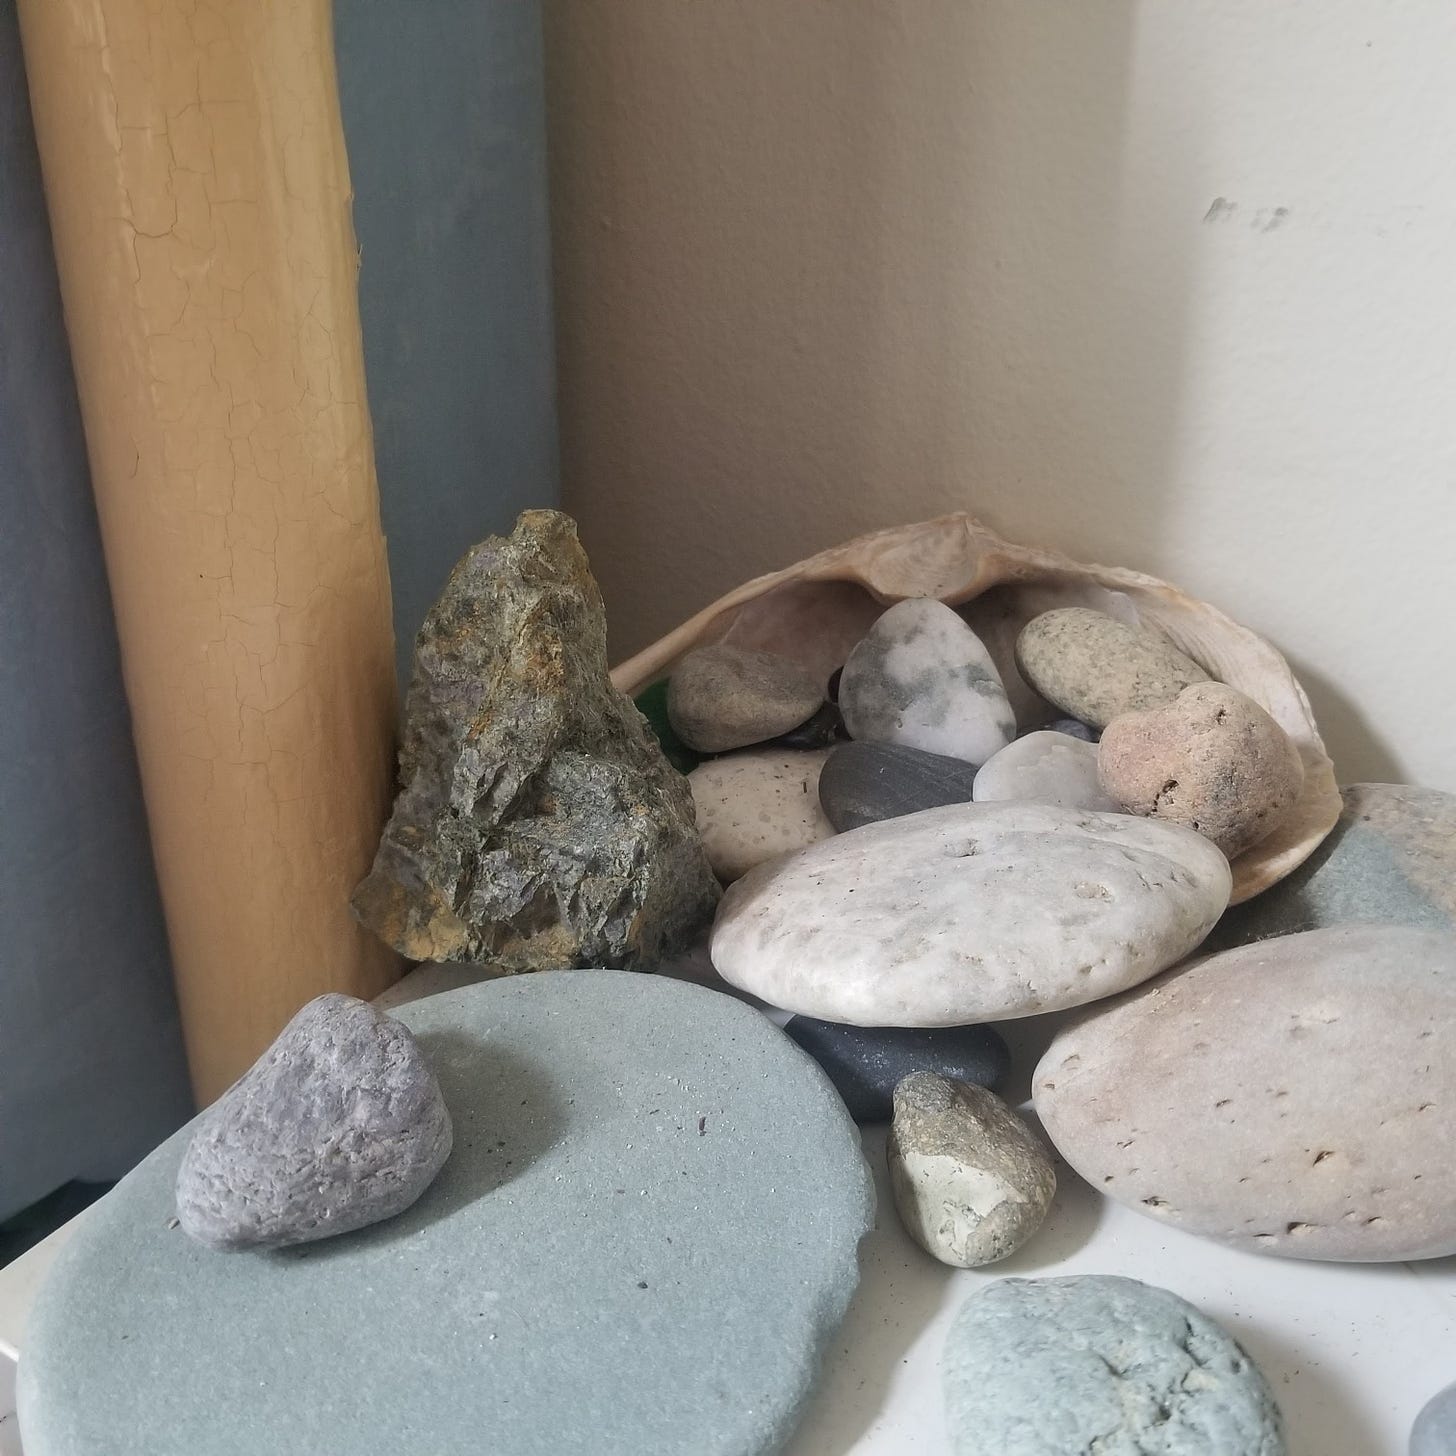 Image description: against a corner of an apartment by a narrow hot water pipe, someone has arranged a small and medium-sized rocks, some overlapping, some in a large clam shell.